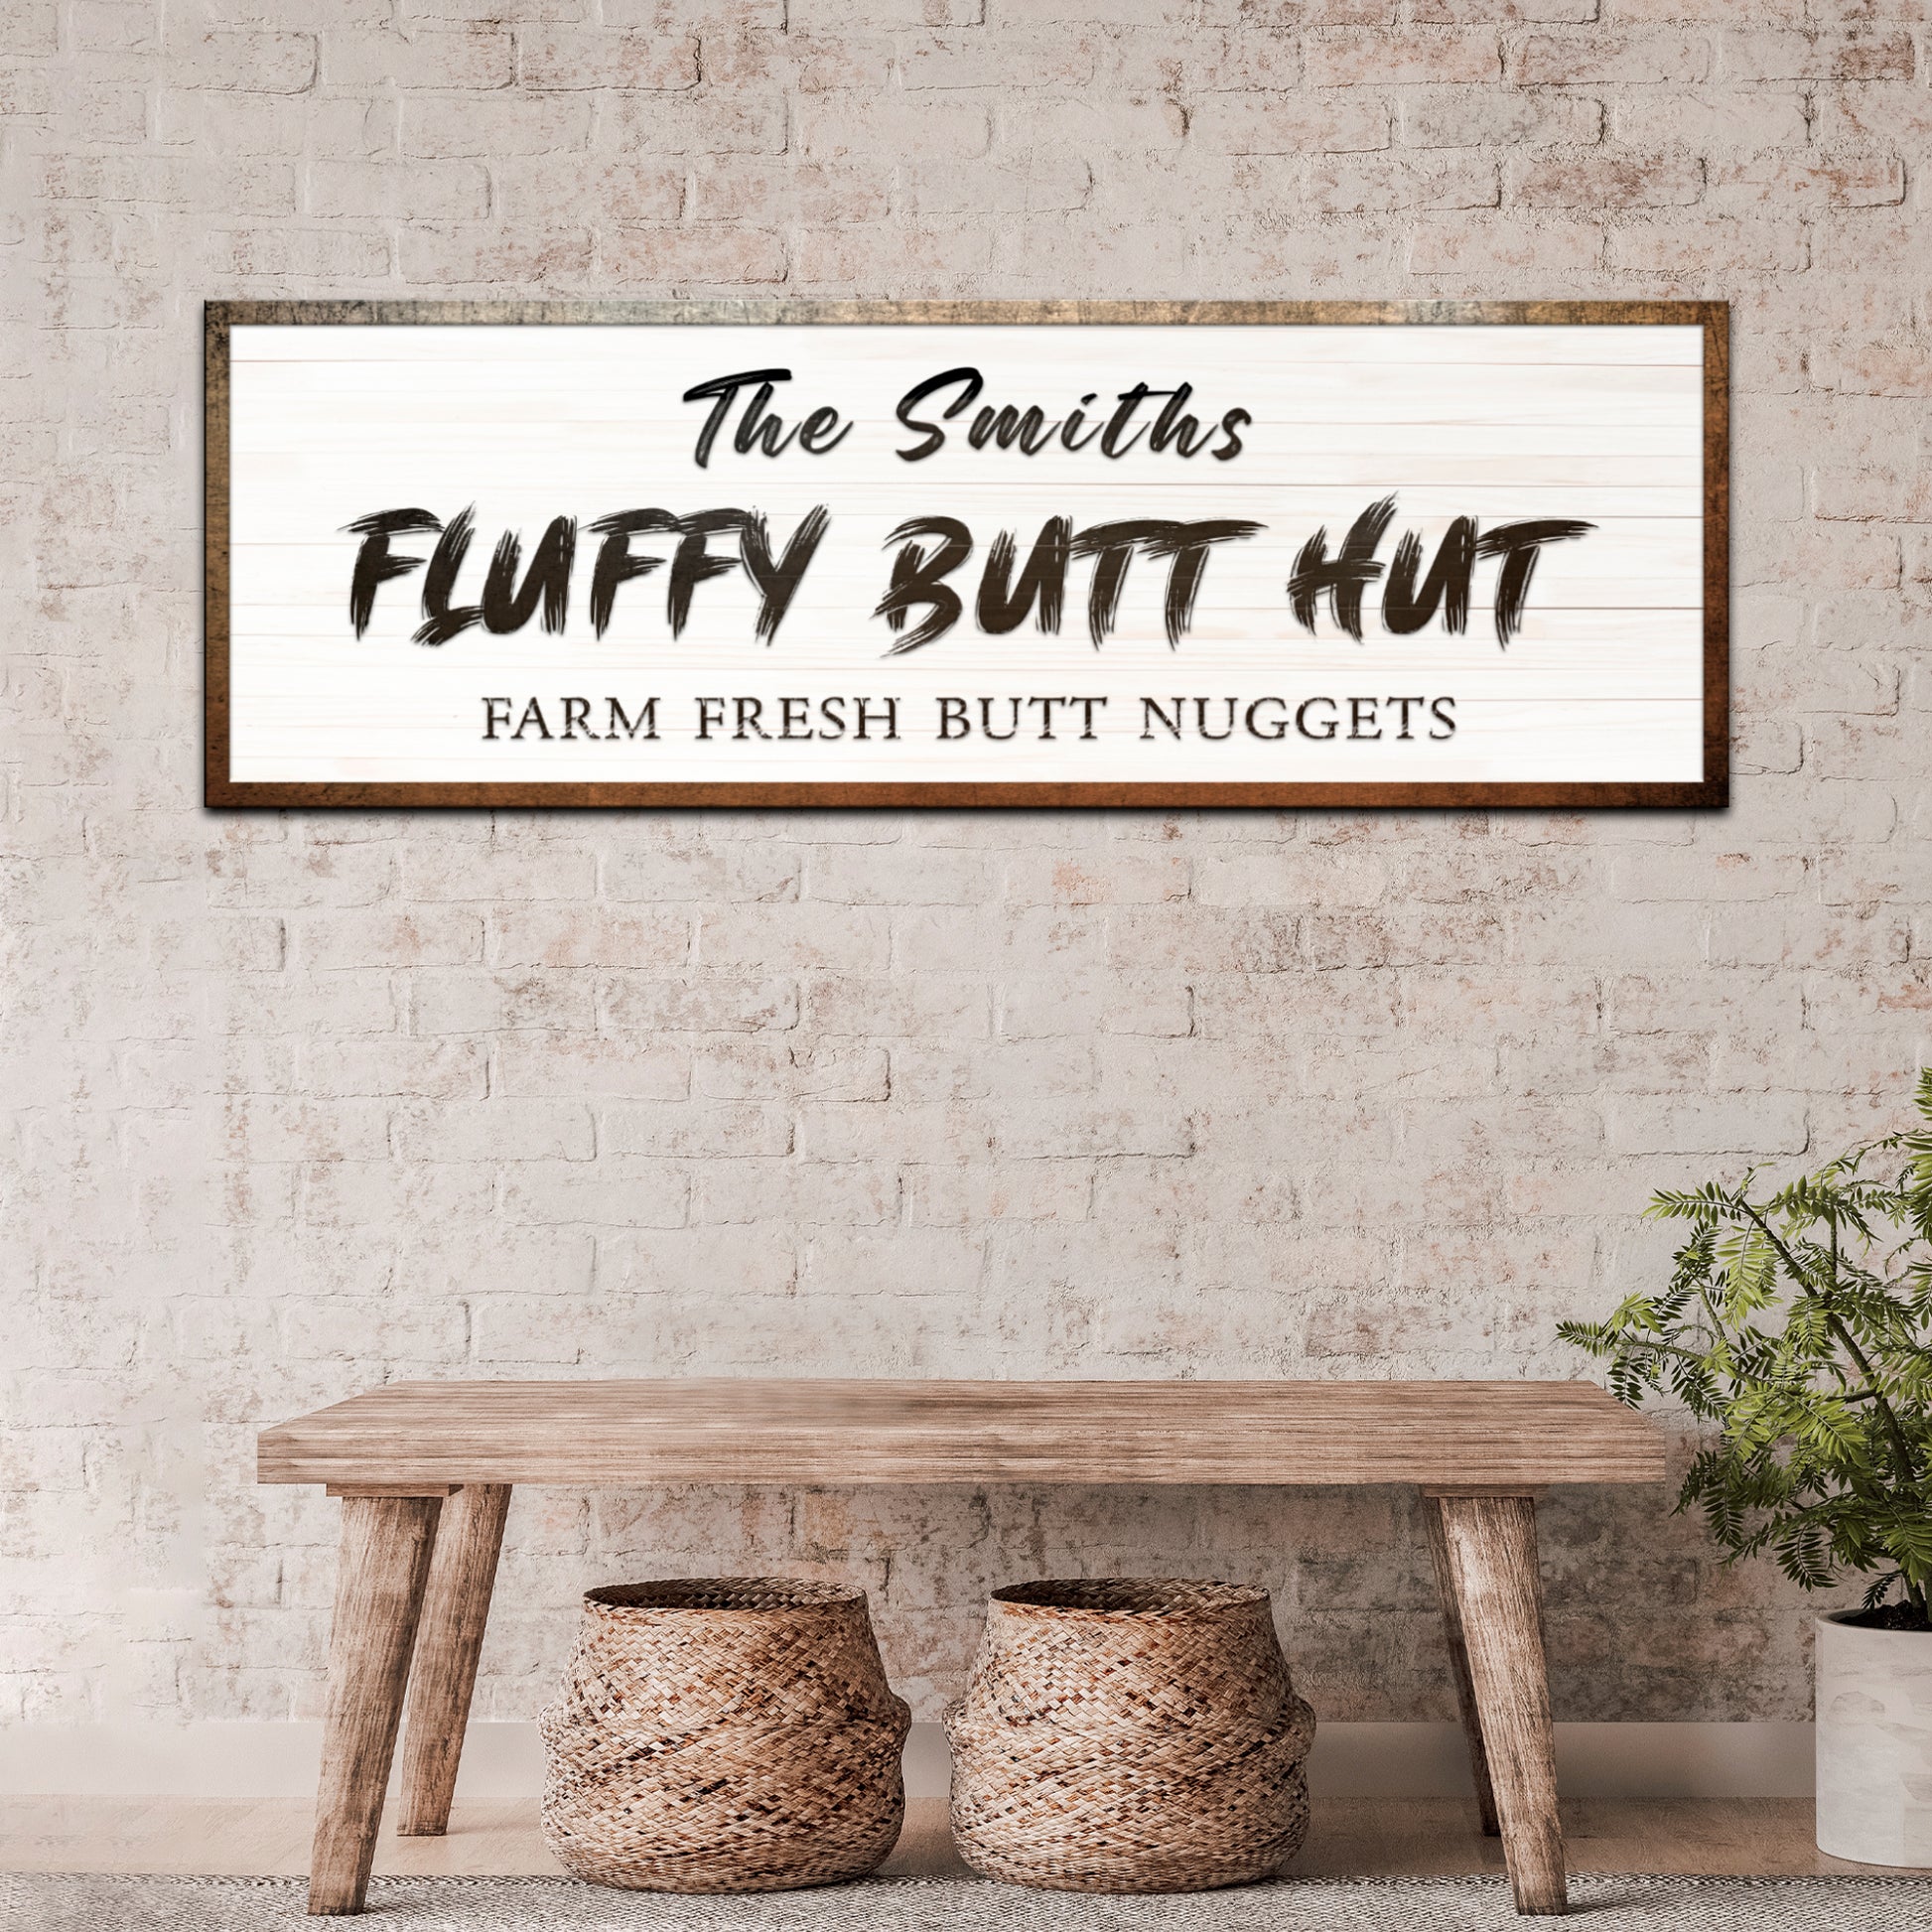 Fluffy Butt Hutt Sign Style 2 - Image by Tailored Canvases